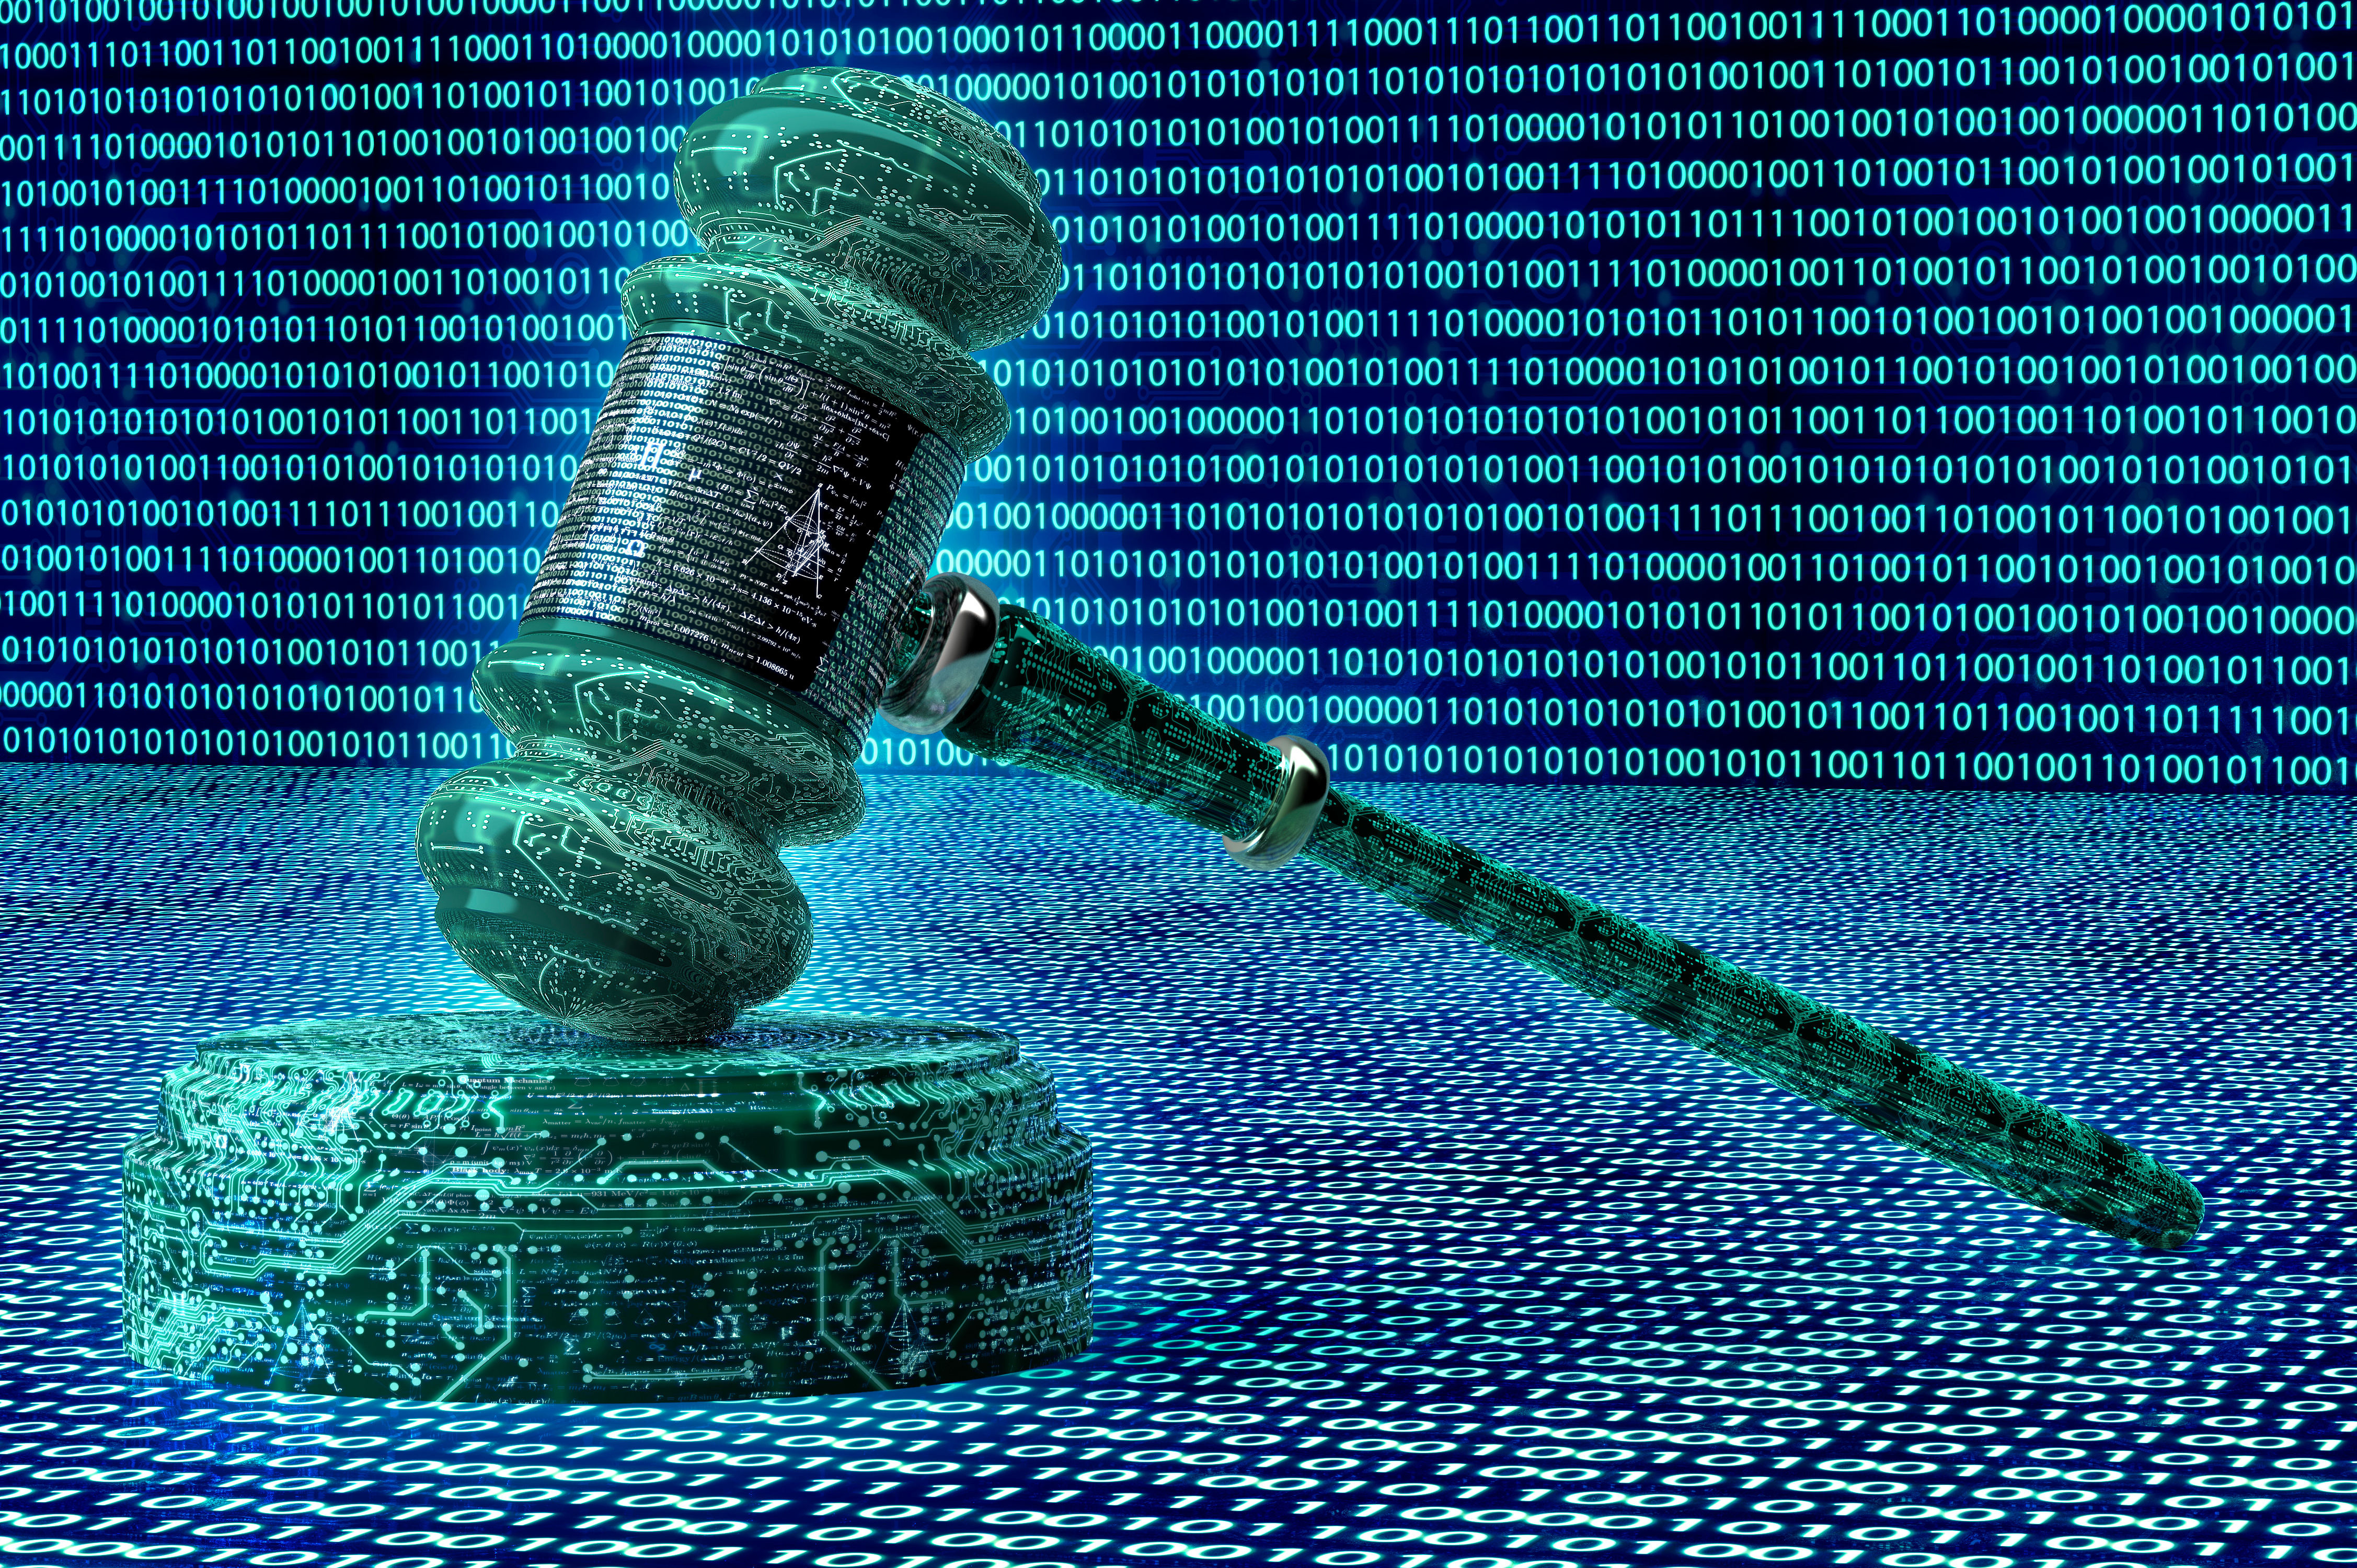 From Dark Reading – Law Firms & Legal Departments Singled Out for Cyberattacks